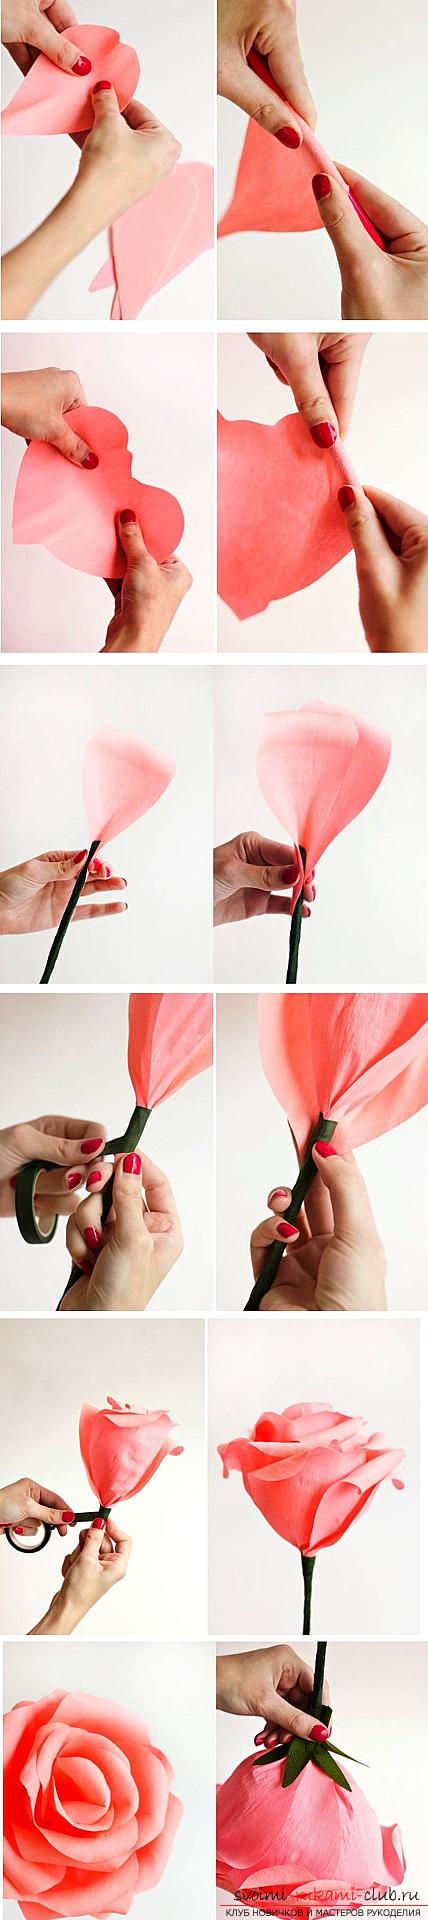 How to make original crafts for springWomen's Day - March 8, step-by-step photo creation frameworks for photos, topiary, crafts in the style of the suite design and a bouquet of huge roses from corrugated paper. Photo №13